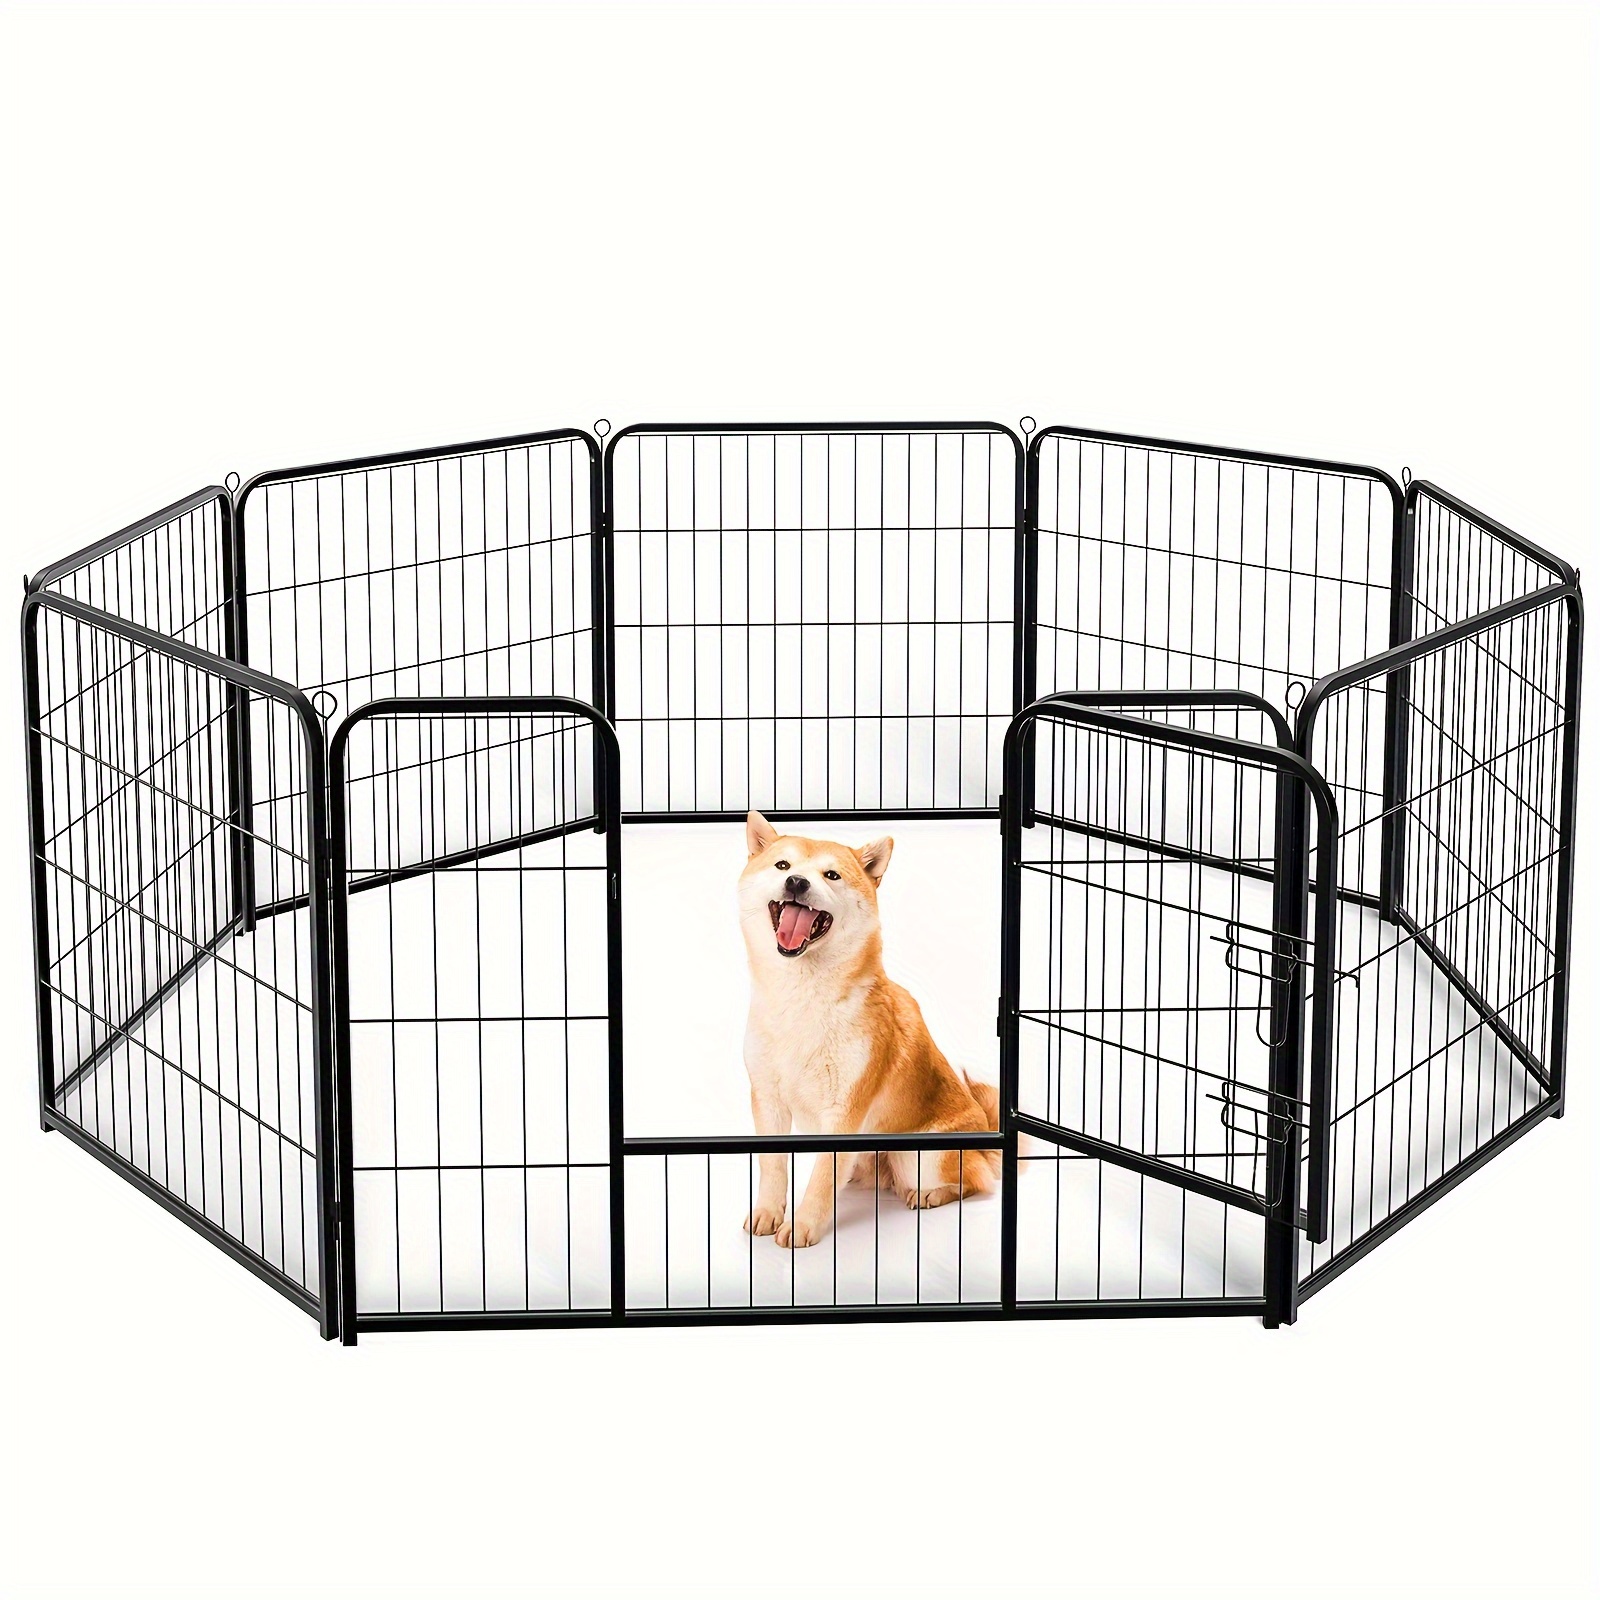 

Smug Dog Playpen Indoor Fence 8 Panel 32" Height Metal Exercise Pen With Door Small Puppy/medium/large Dogs Animal Pet For Outdoor, Garden, Yard, Rv Camping